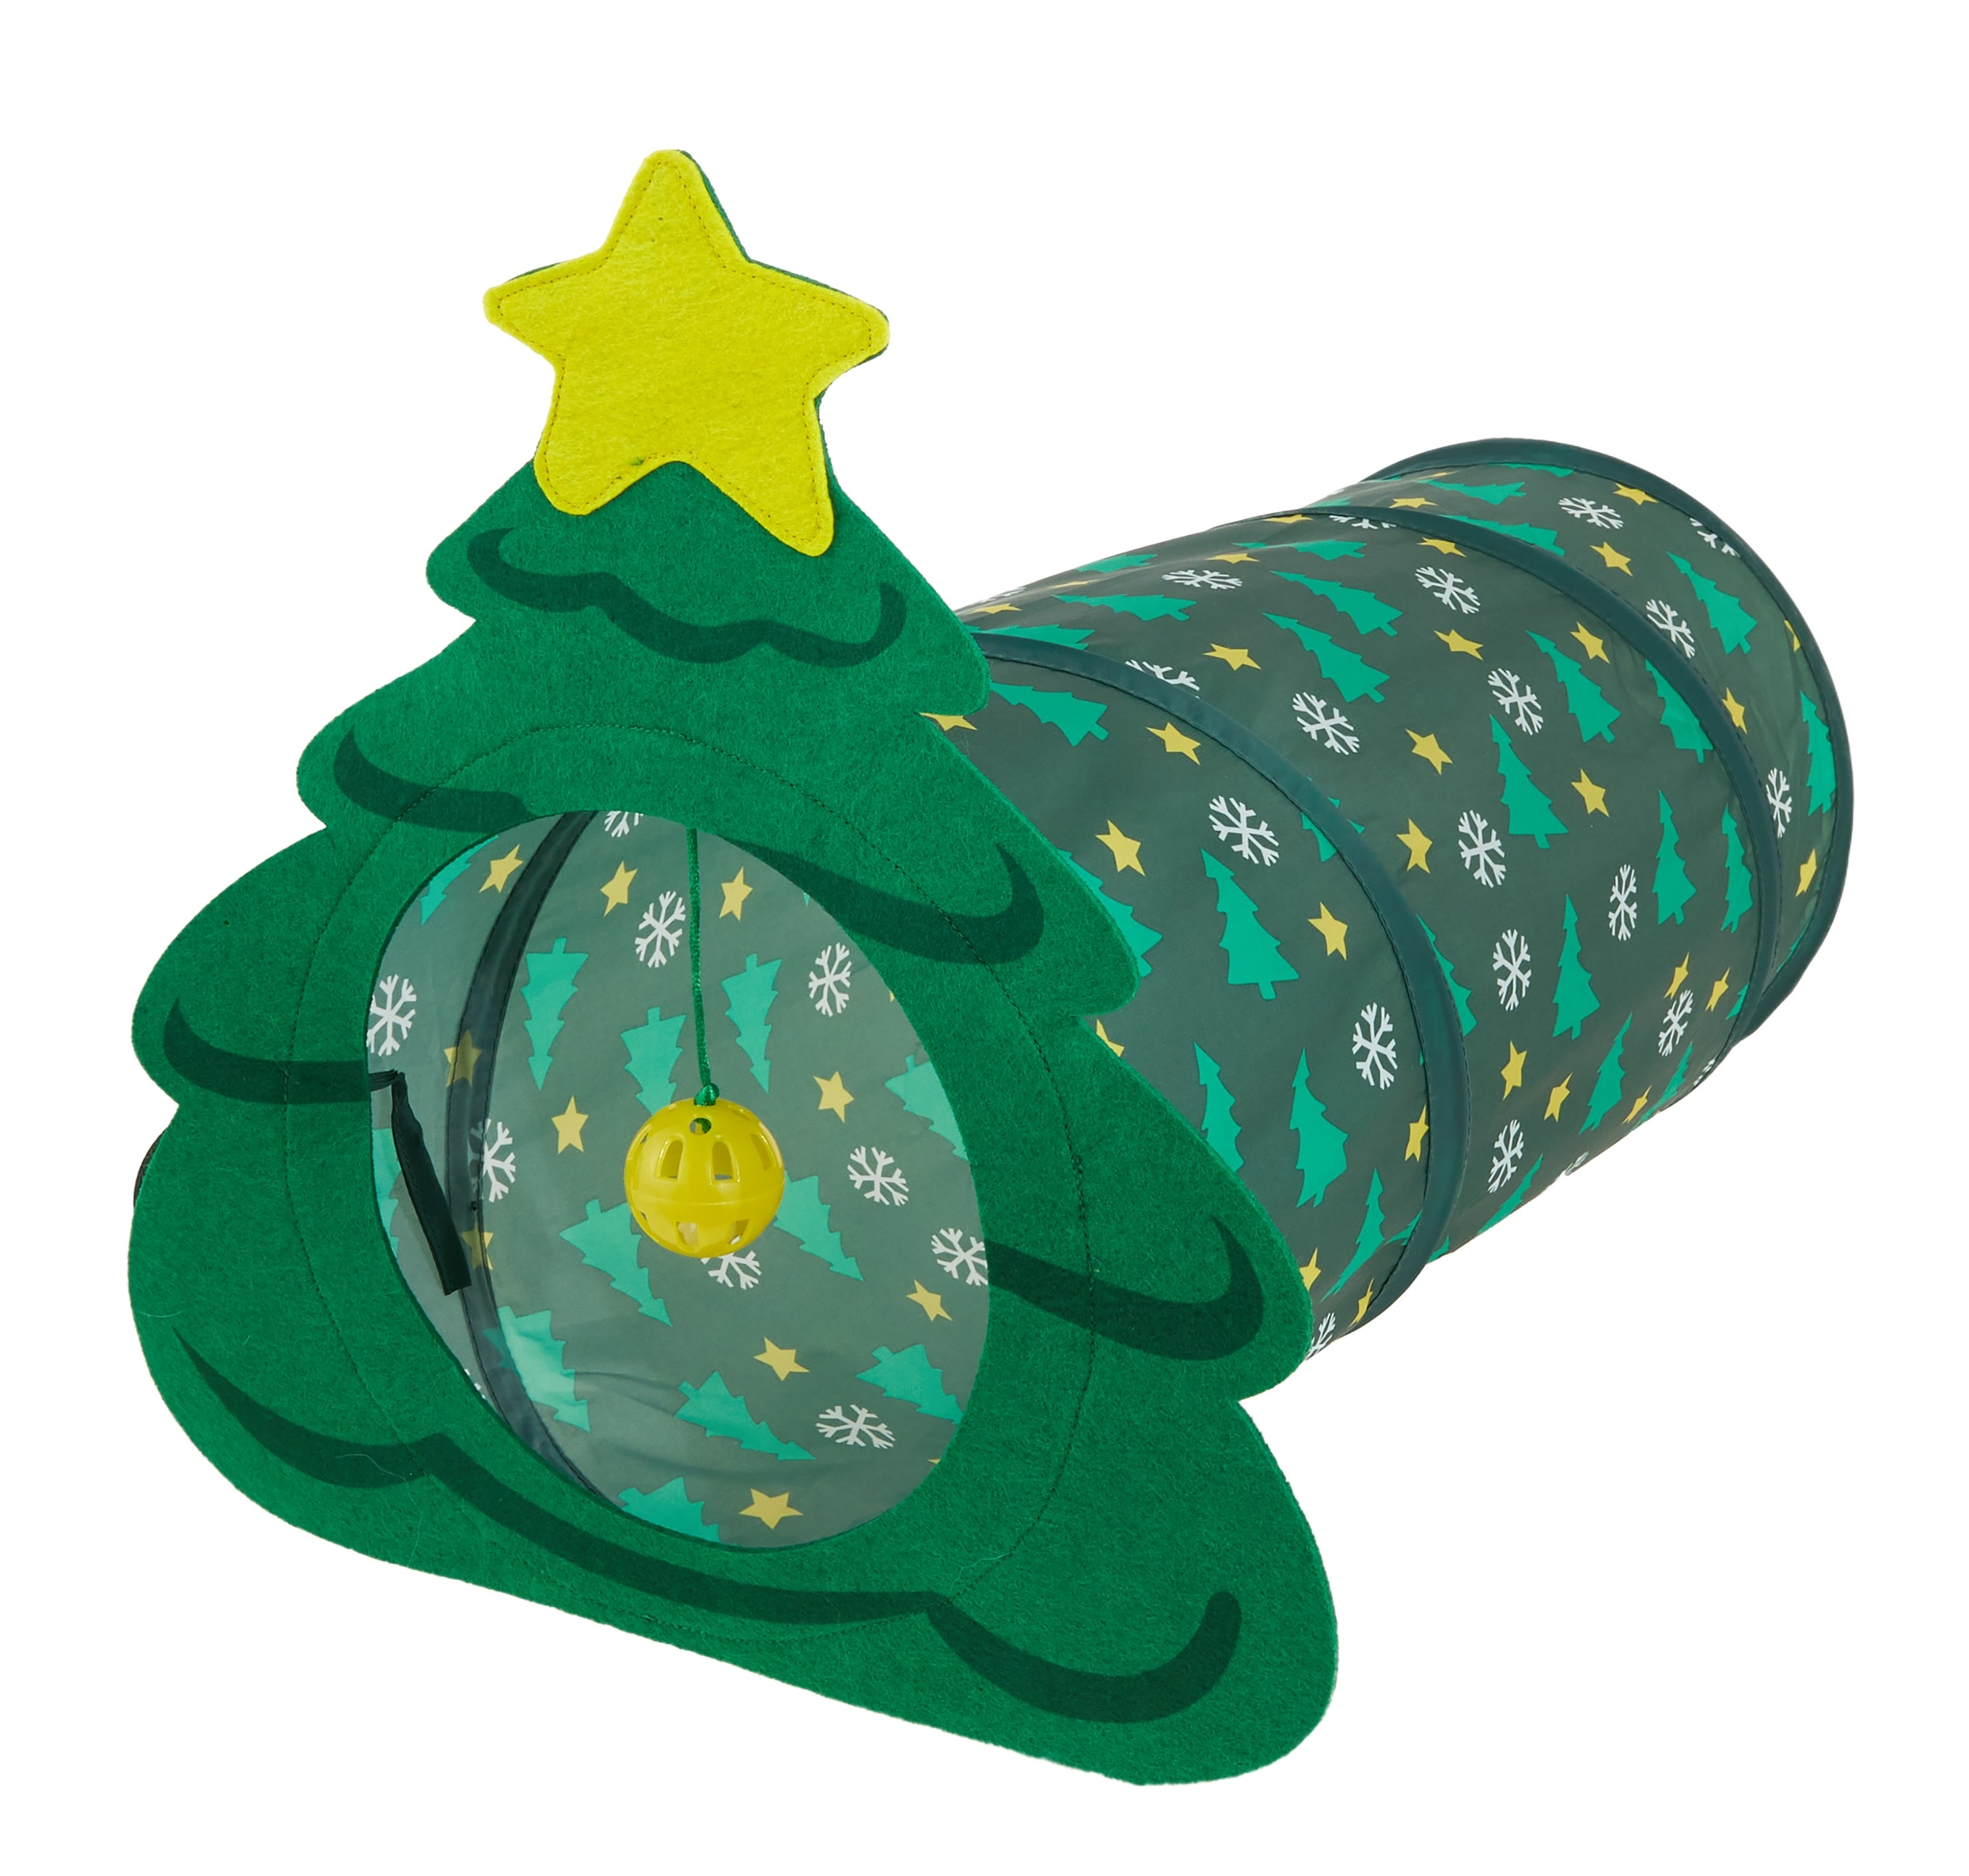 Cat tunnel decorated with Christmas trees and snowflakes